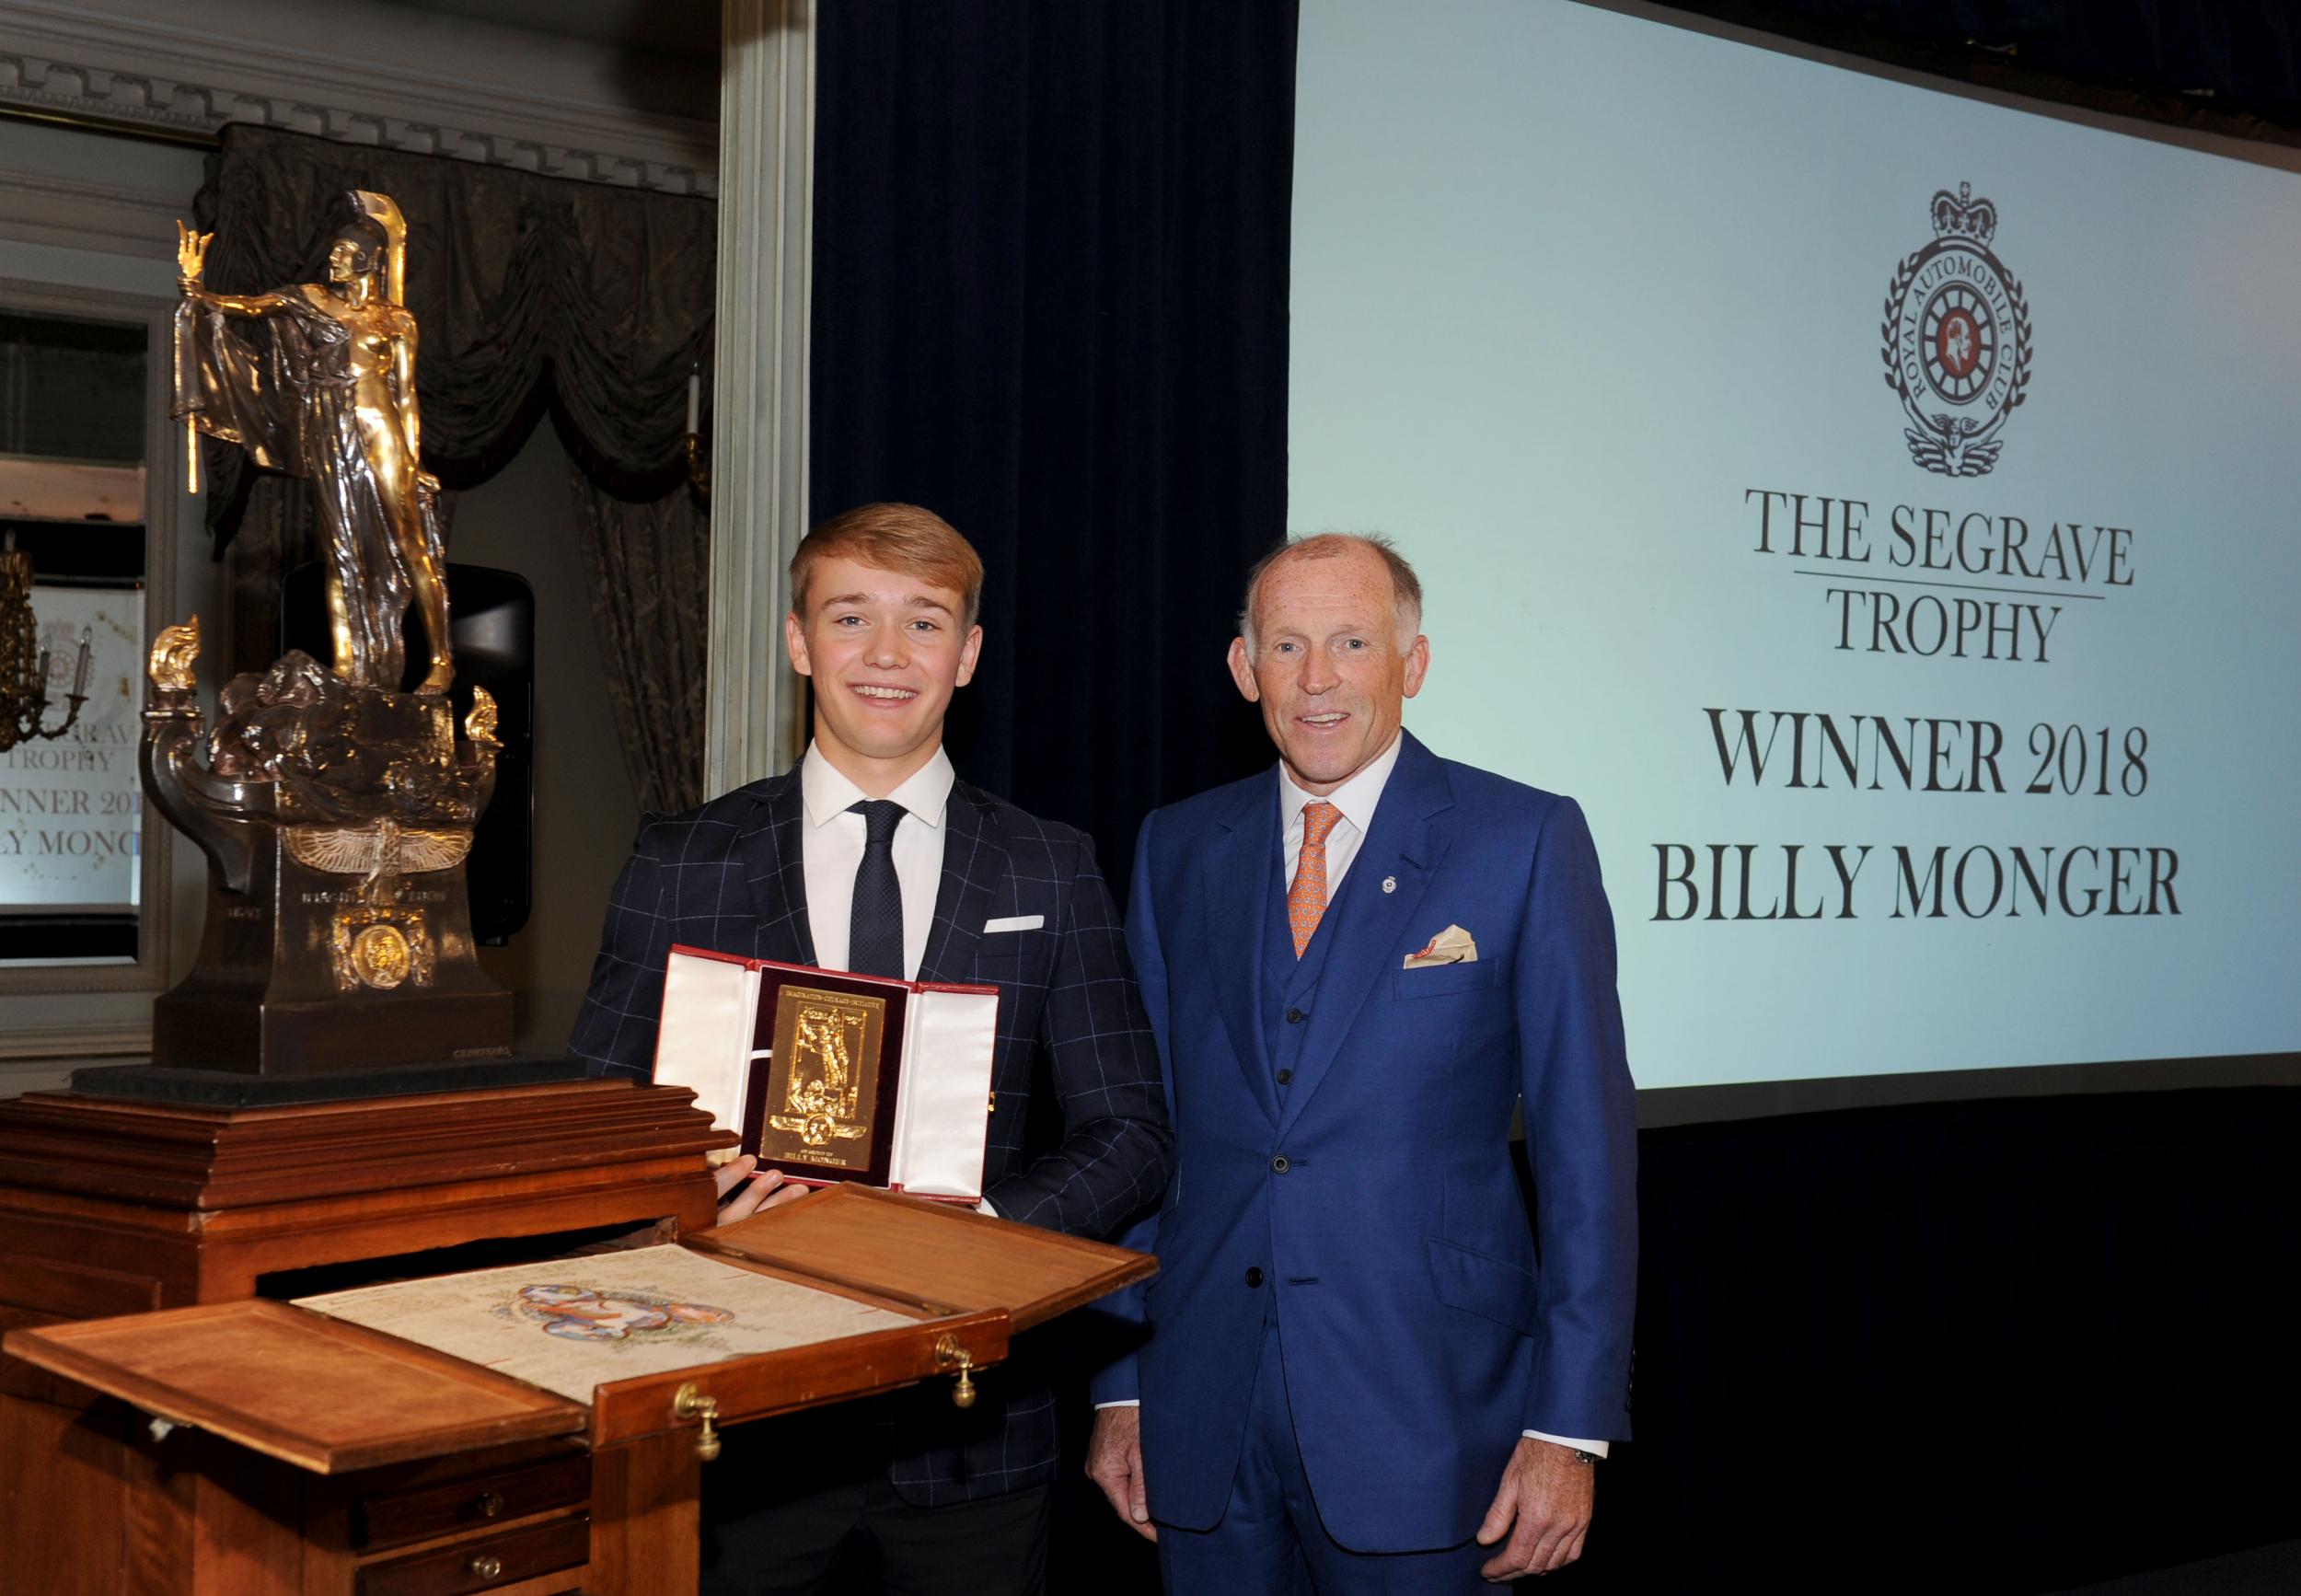 Class act: Billy Monger presented with the Segrave Trophy by Ben Cussons, chairman of the Royal Automobile Club